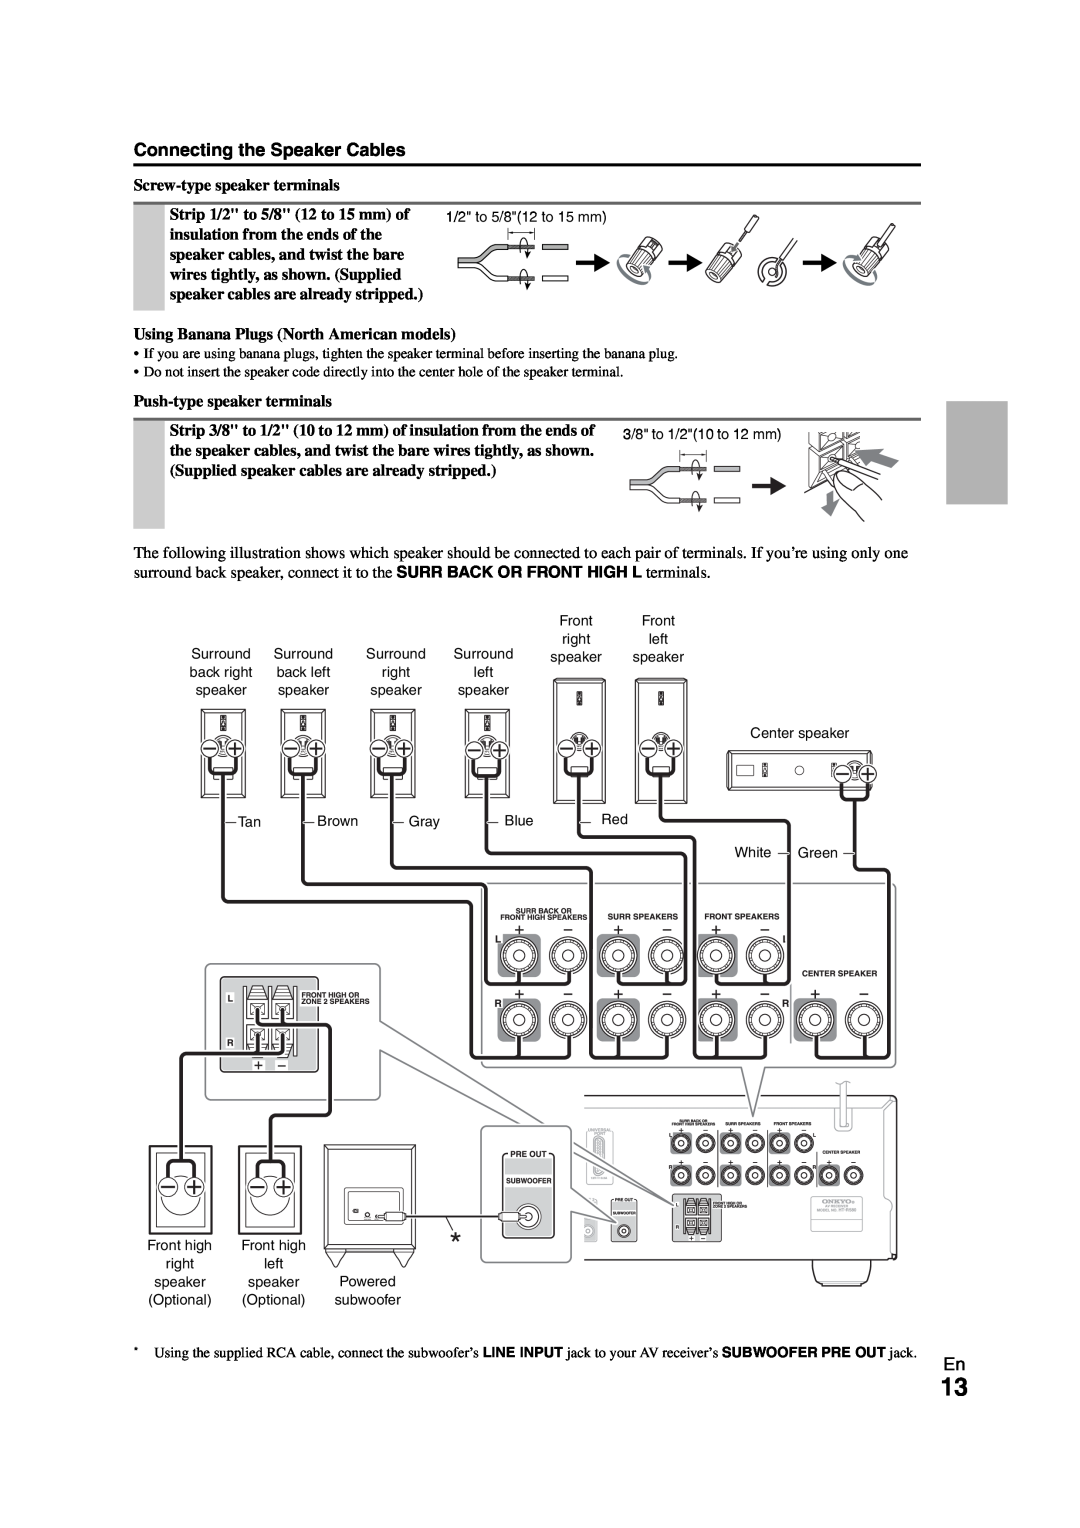 Onkyo HT-S5300 instruction manual Connecting the Speaker Cables 